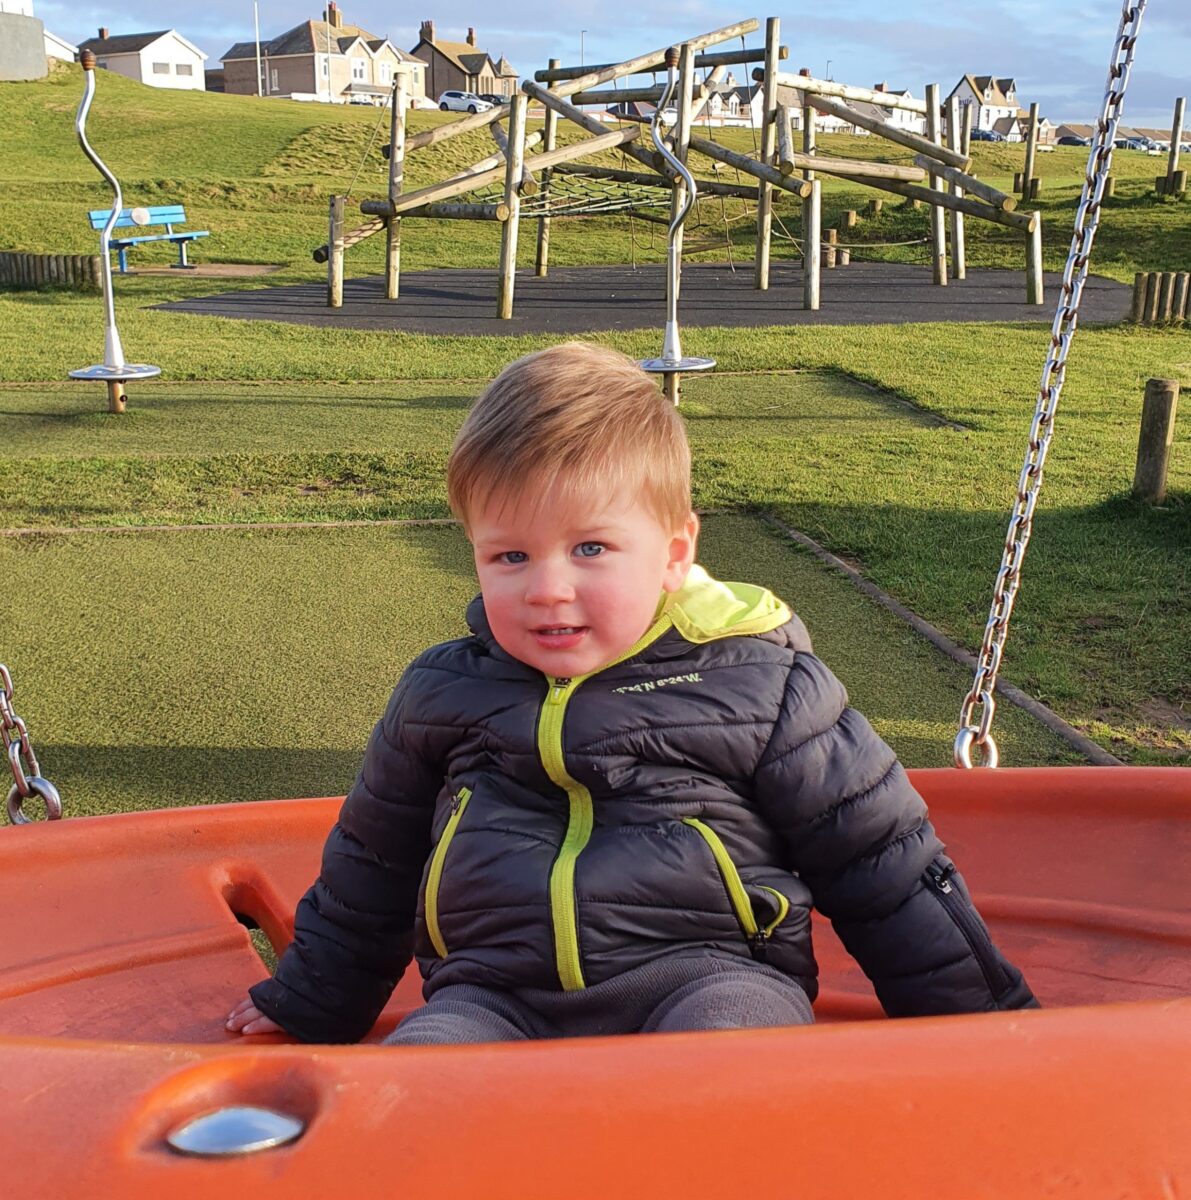 Former Children’s Air Ambulance patient now a ‘cheeky chappy’ as he celebrates second birthday